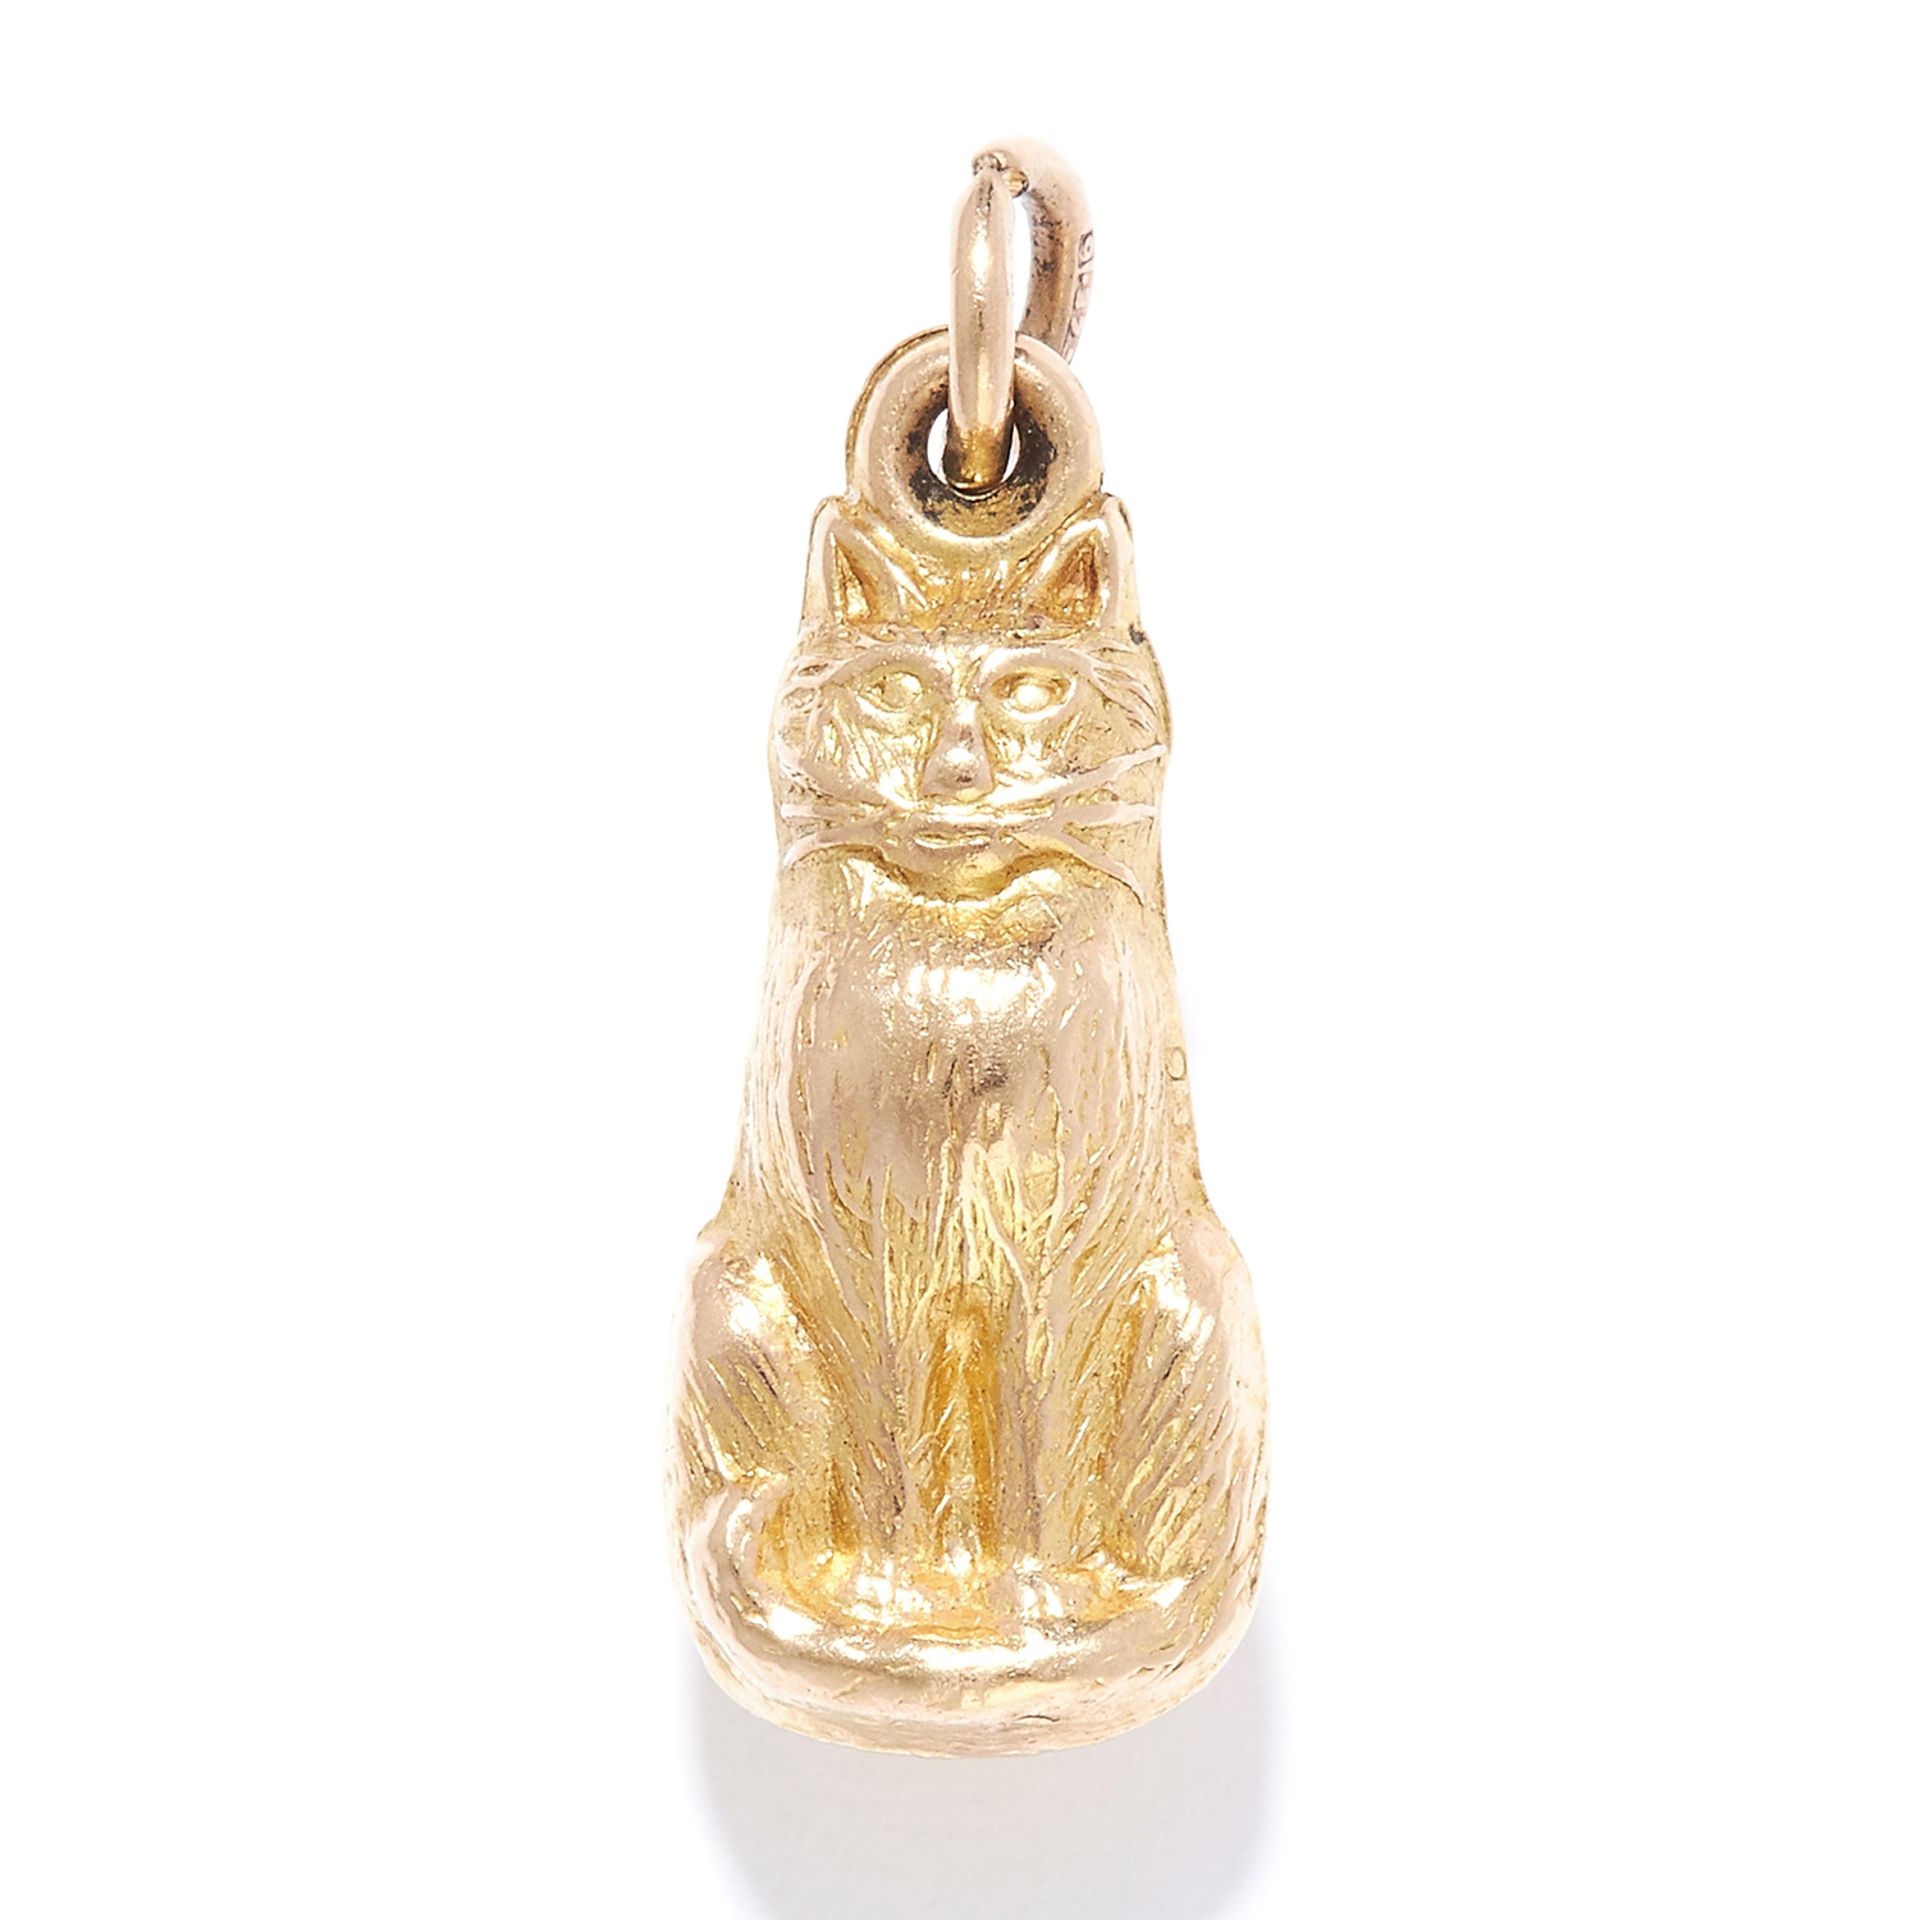 A CAT CHARM / PENDANT in yellow gold, designed as a cat, British hallmarks, 2.0cm, 0.8g.